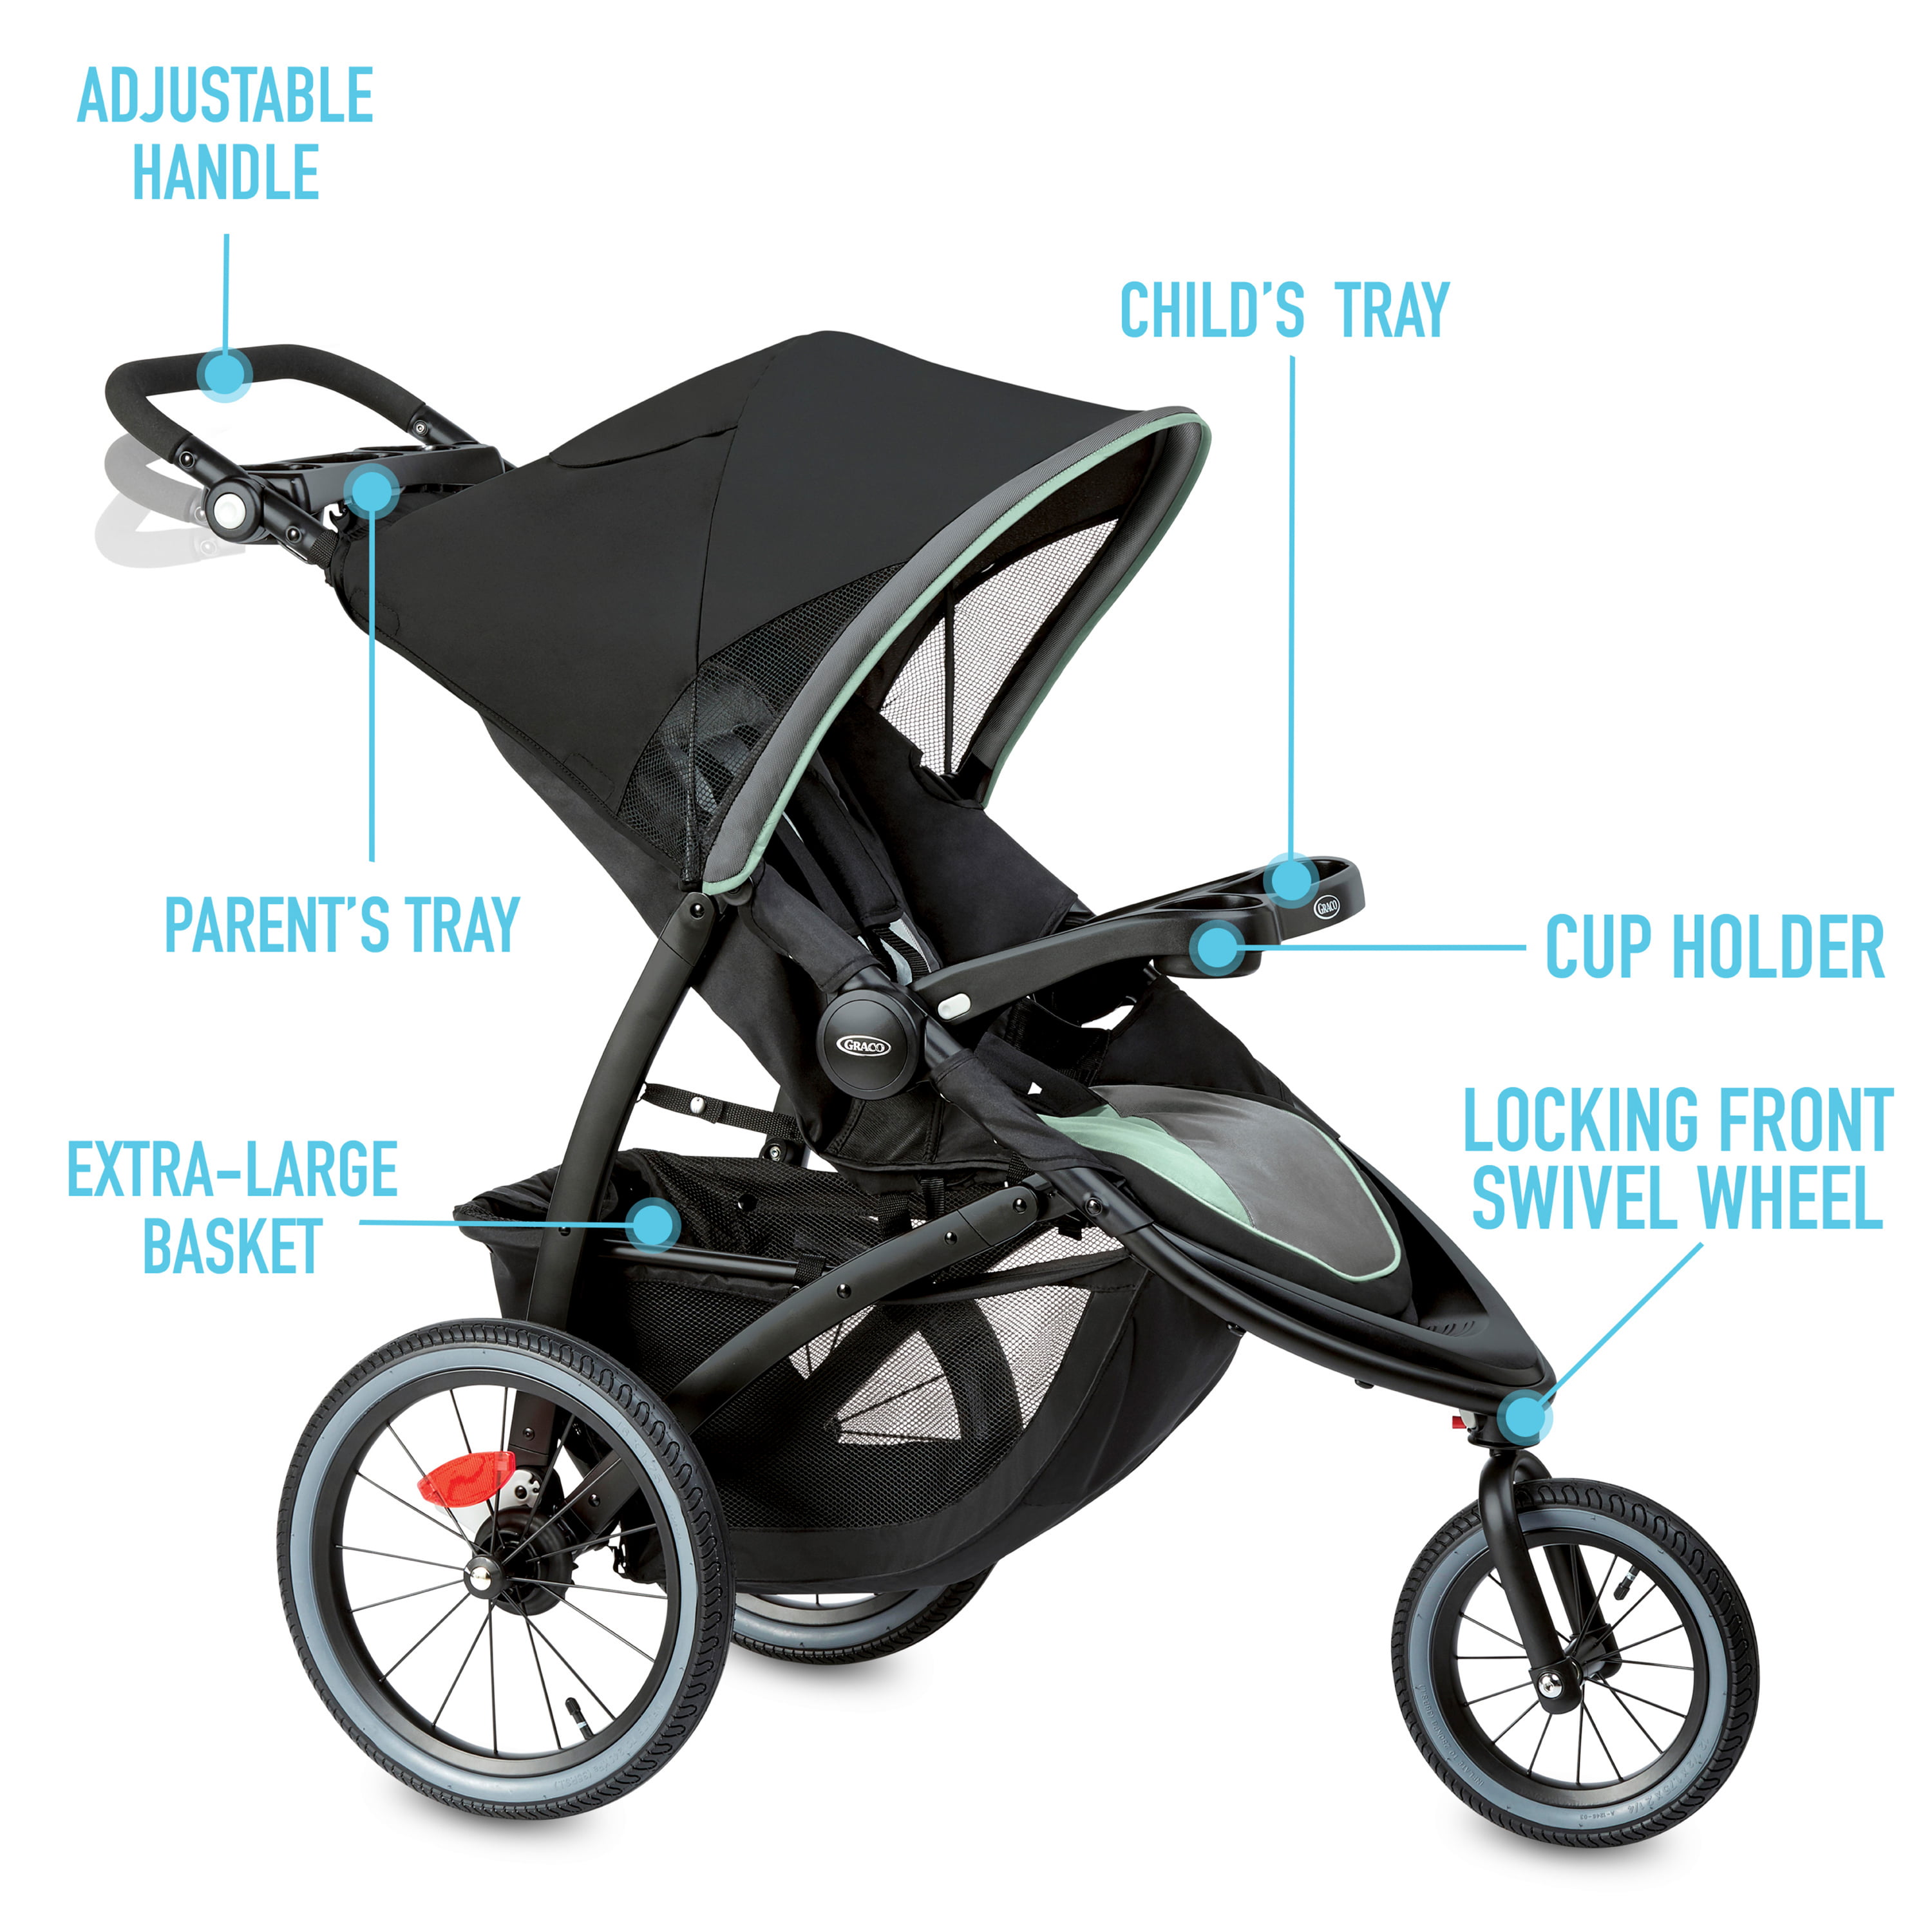 fast action jogger lx travel system